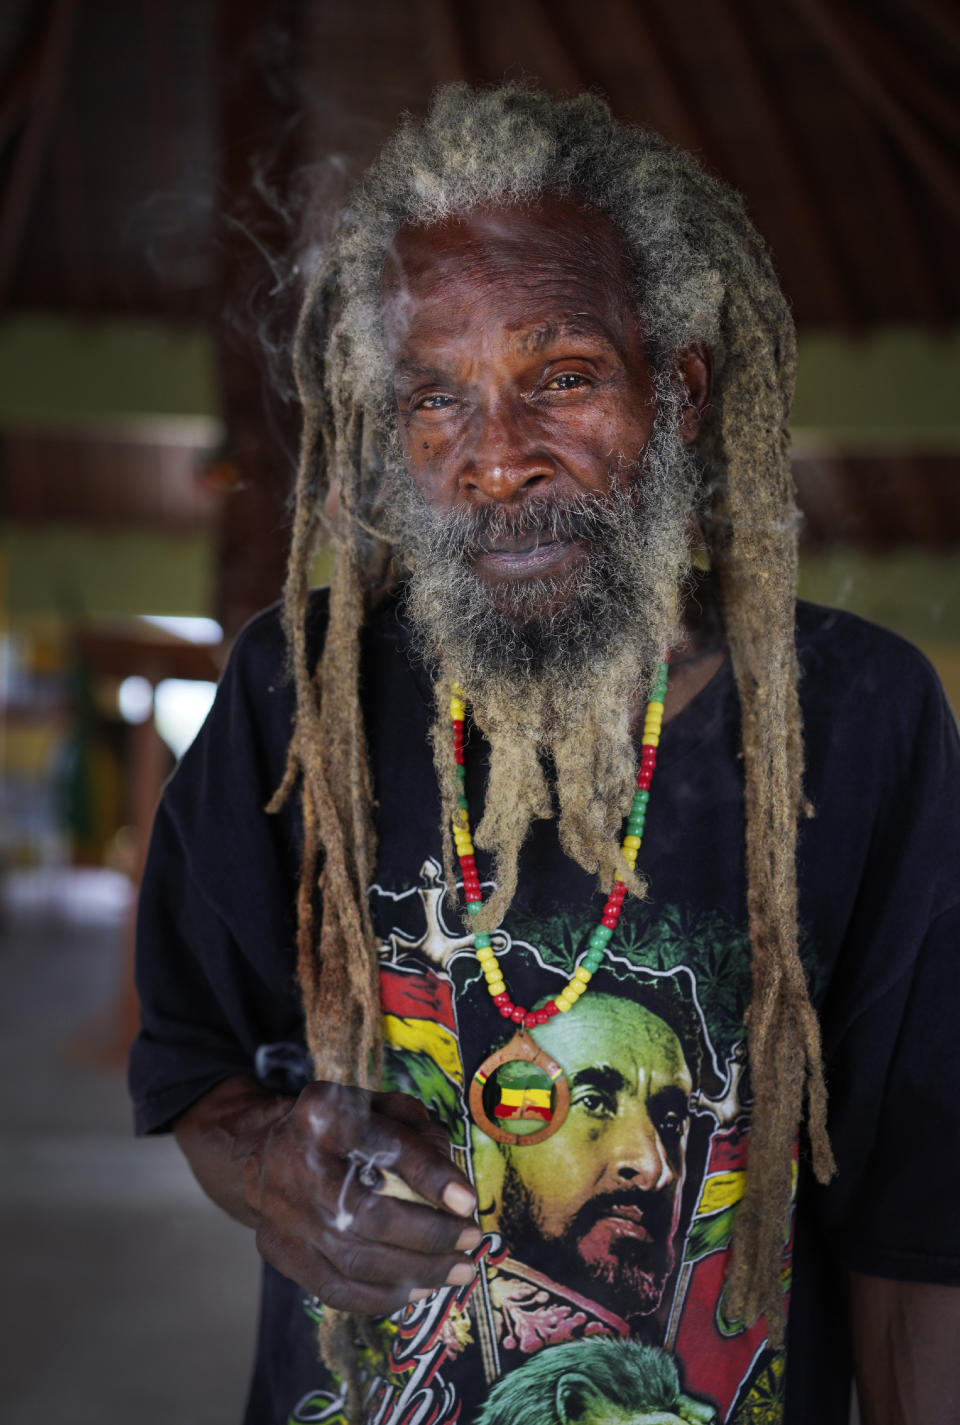 Rastafari member Jahwanzer John stands for a portrait while smoking a joint in the tabernacle after Sunday service on May 14, 2023, in Liberta, Antigua. (AP Photo/Jessie Wardarski)